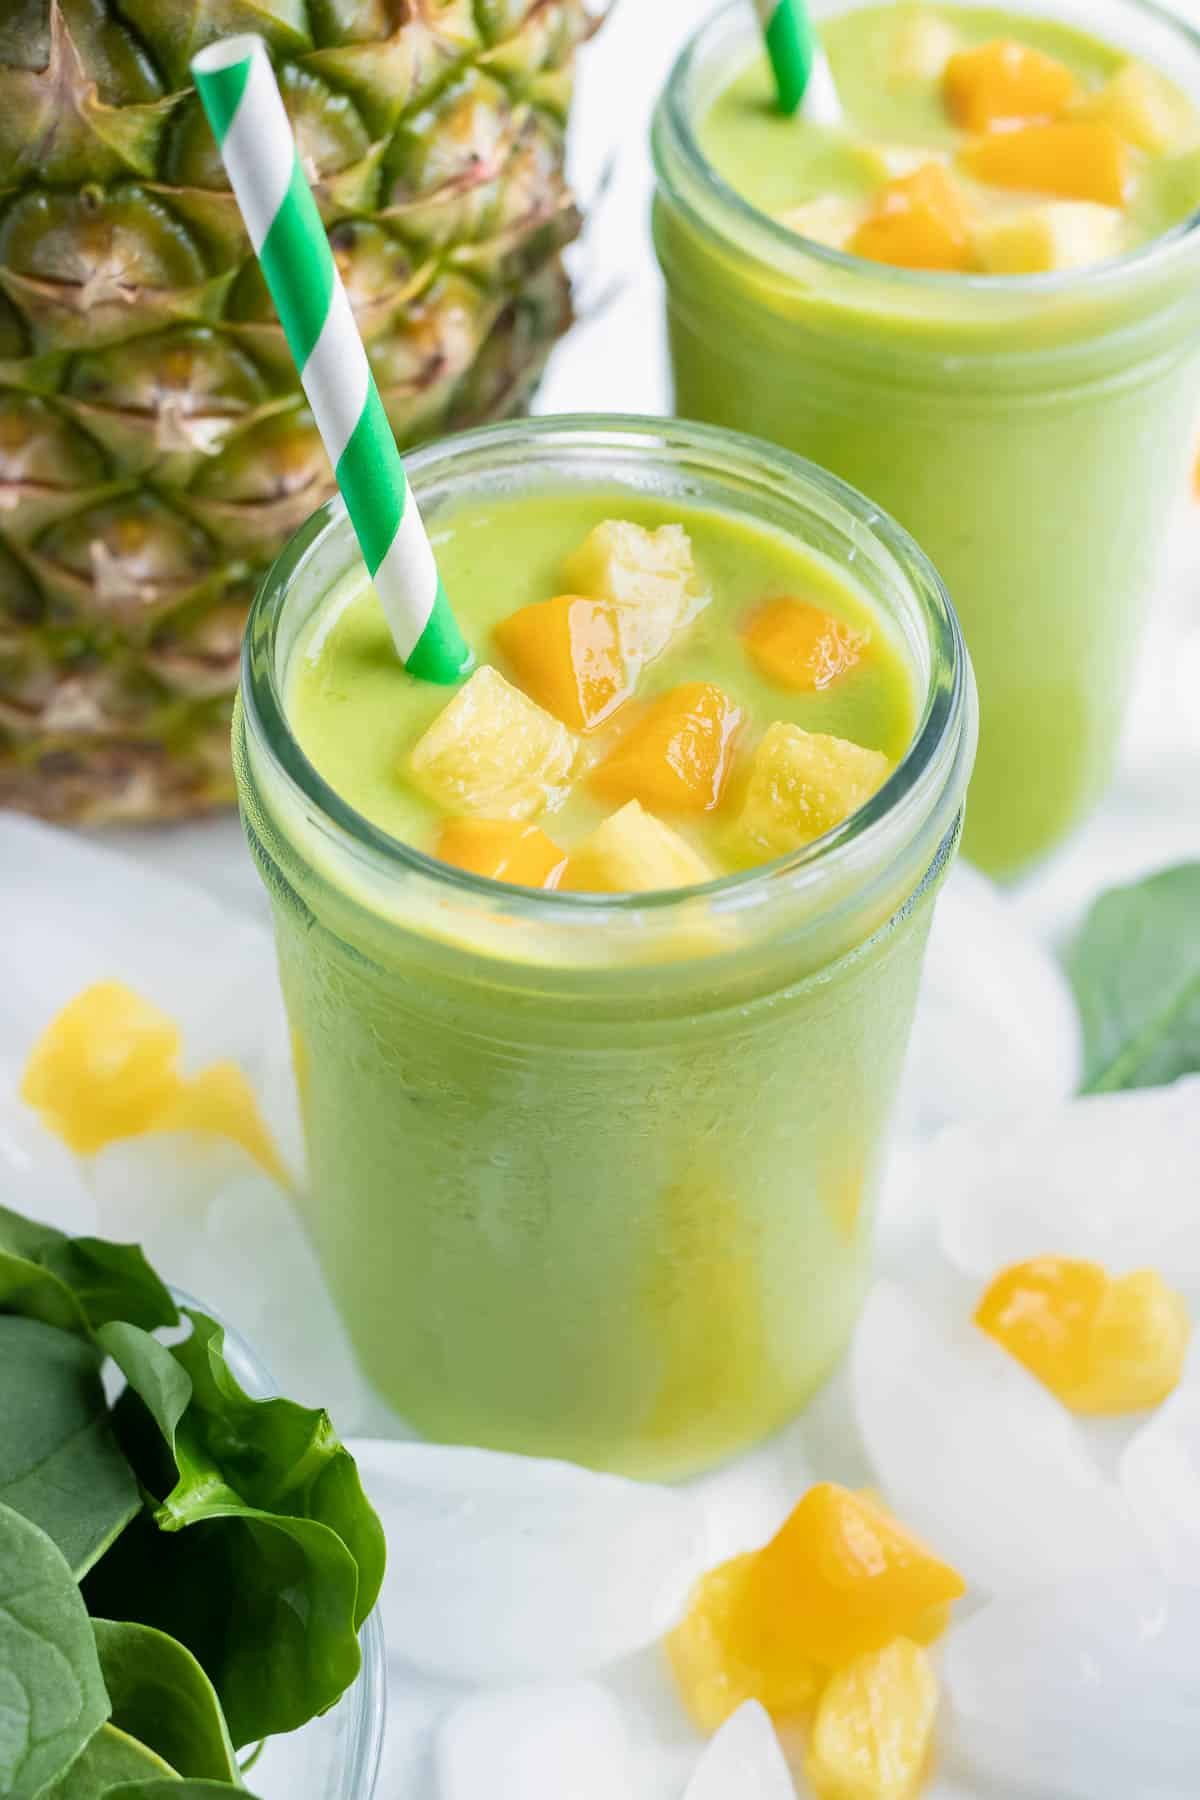 Two healthy green smoothies is set on the counter in a glass with a straw.